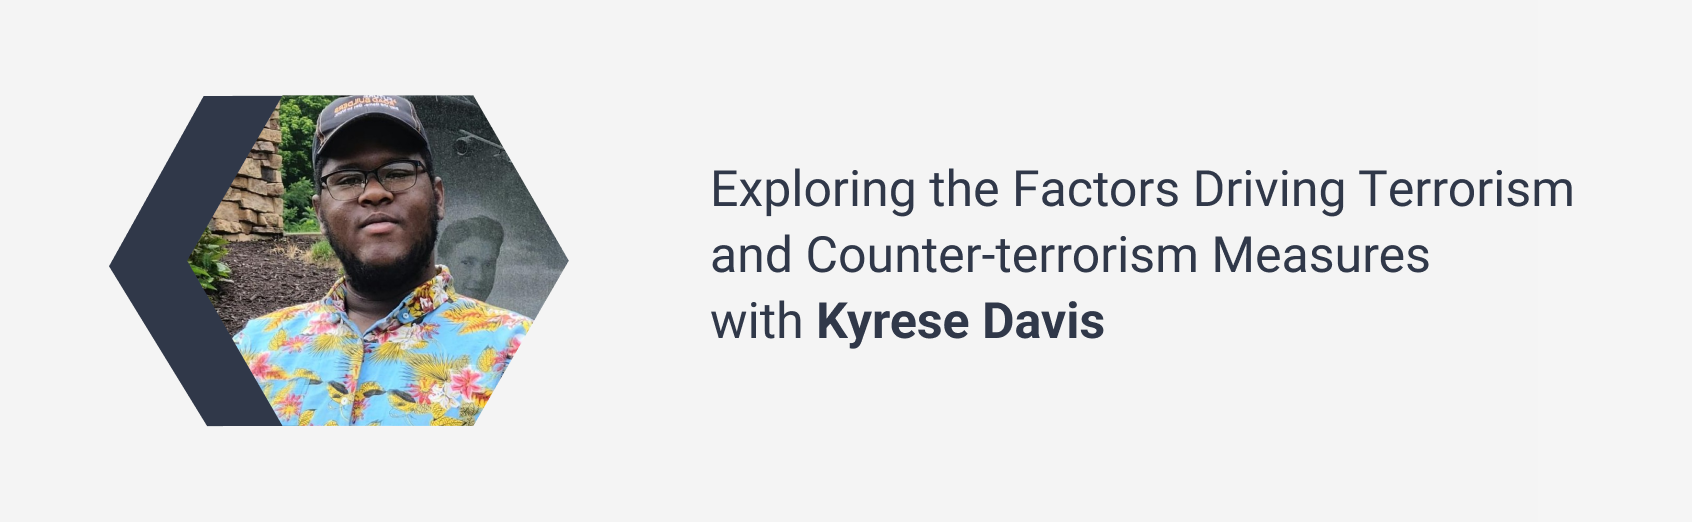 Exploring the Factors Driving Terrorism and Counter-terrorism Measures with Kyrese Davis